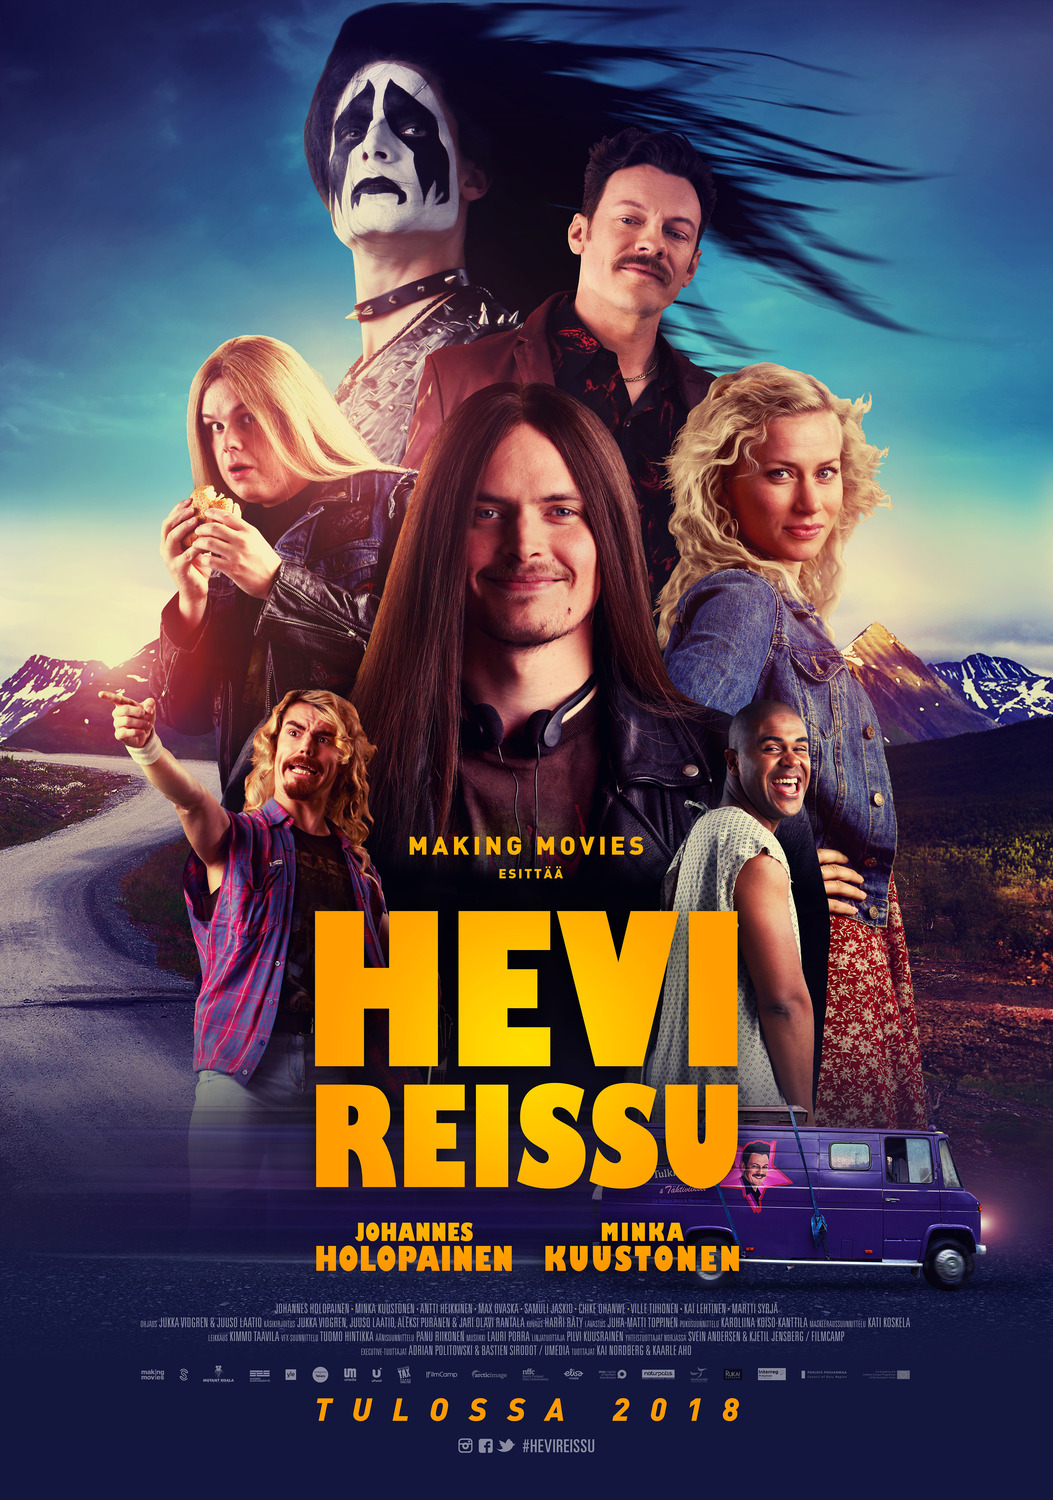 Extra Large Movie Poster Image for Hevi reissu 